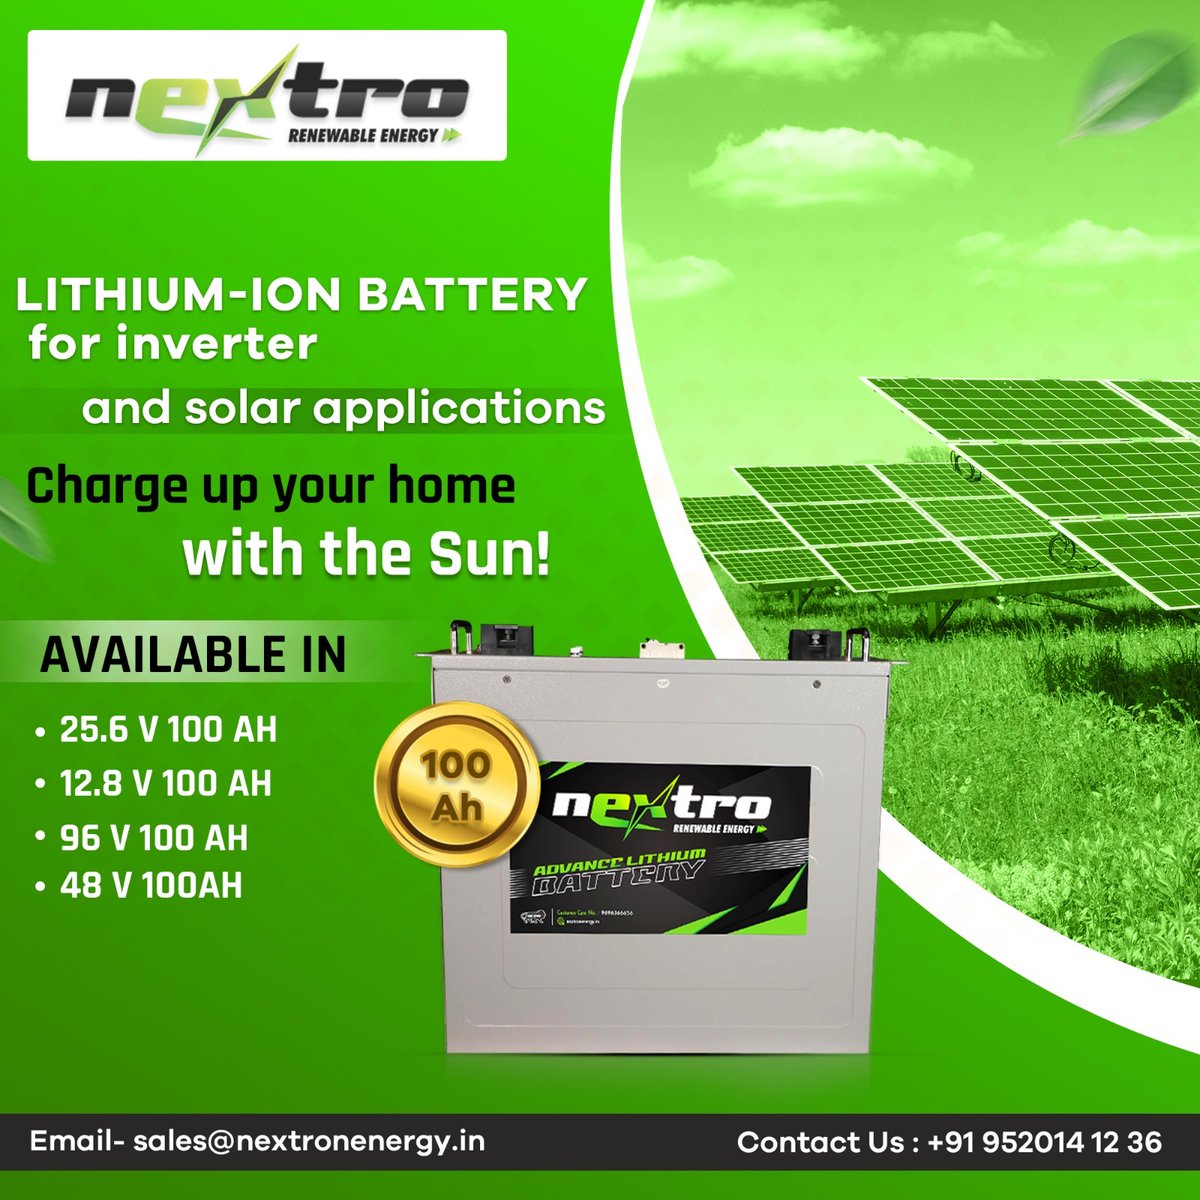 Power up your world with the boundless energy of the Sun with Nextro lithium-ion solar batteries that are fast charging, maintenance free and available in:
12.8 V 100 Ah
25.6 V 100 Ah
48 V 100 Ah
96 V 100 Ah

#NextroBattery #Battery #LithiumIon #InverterBattery #LithiumIonBattery